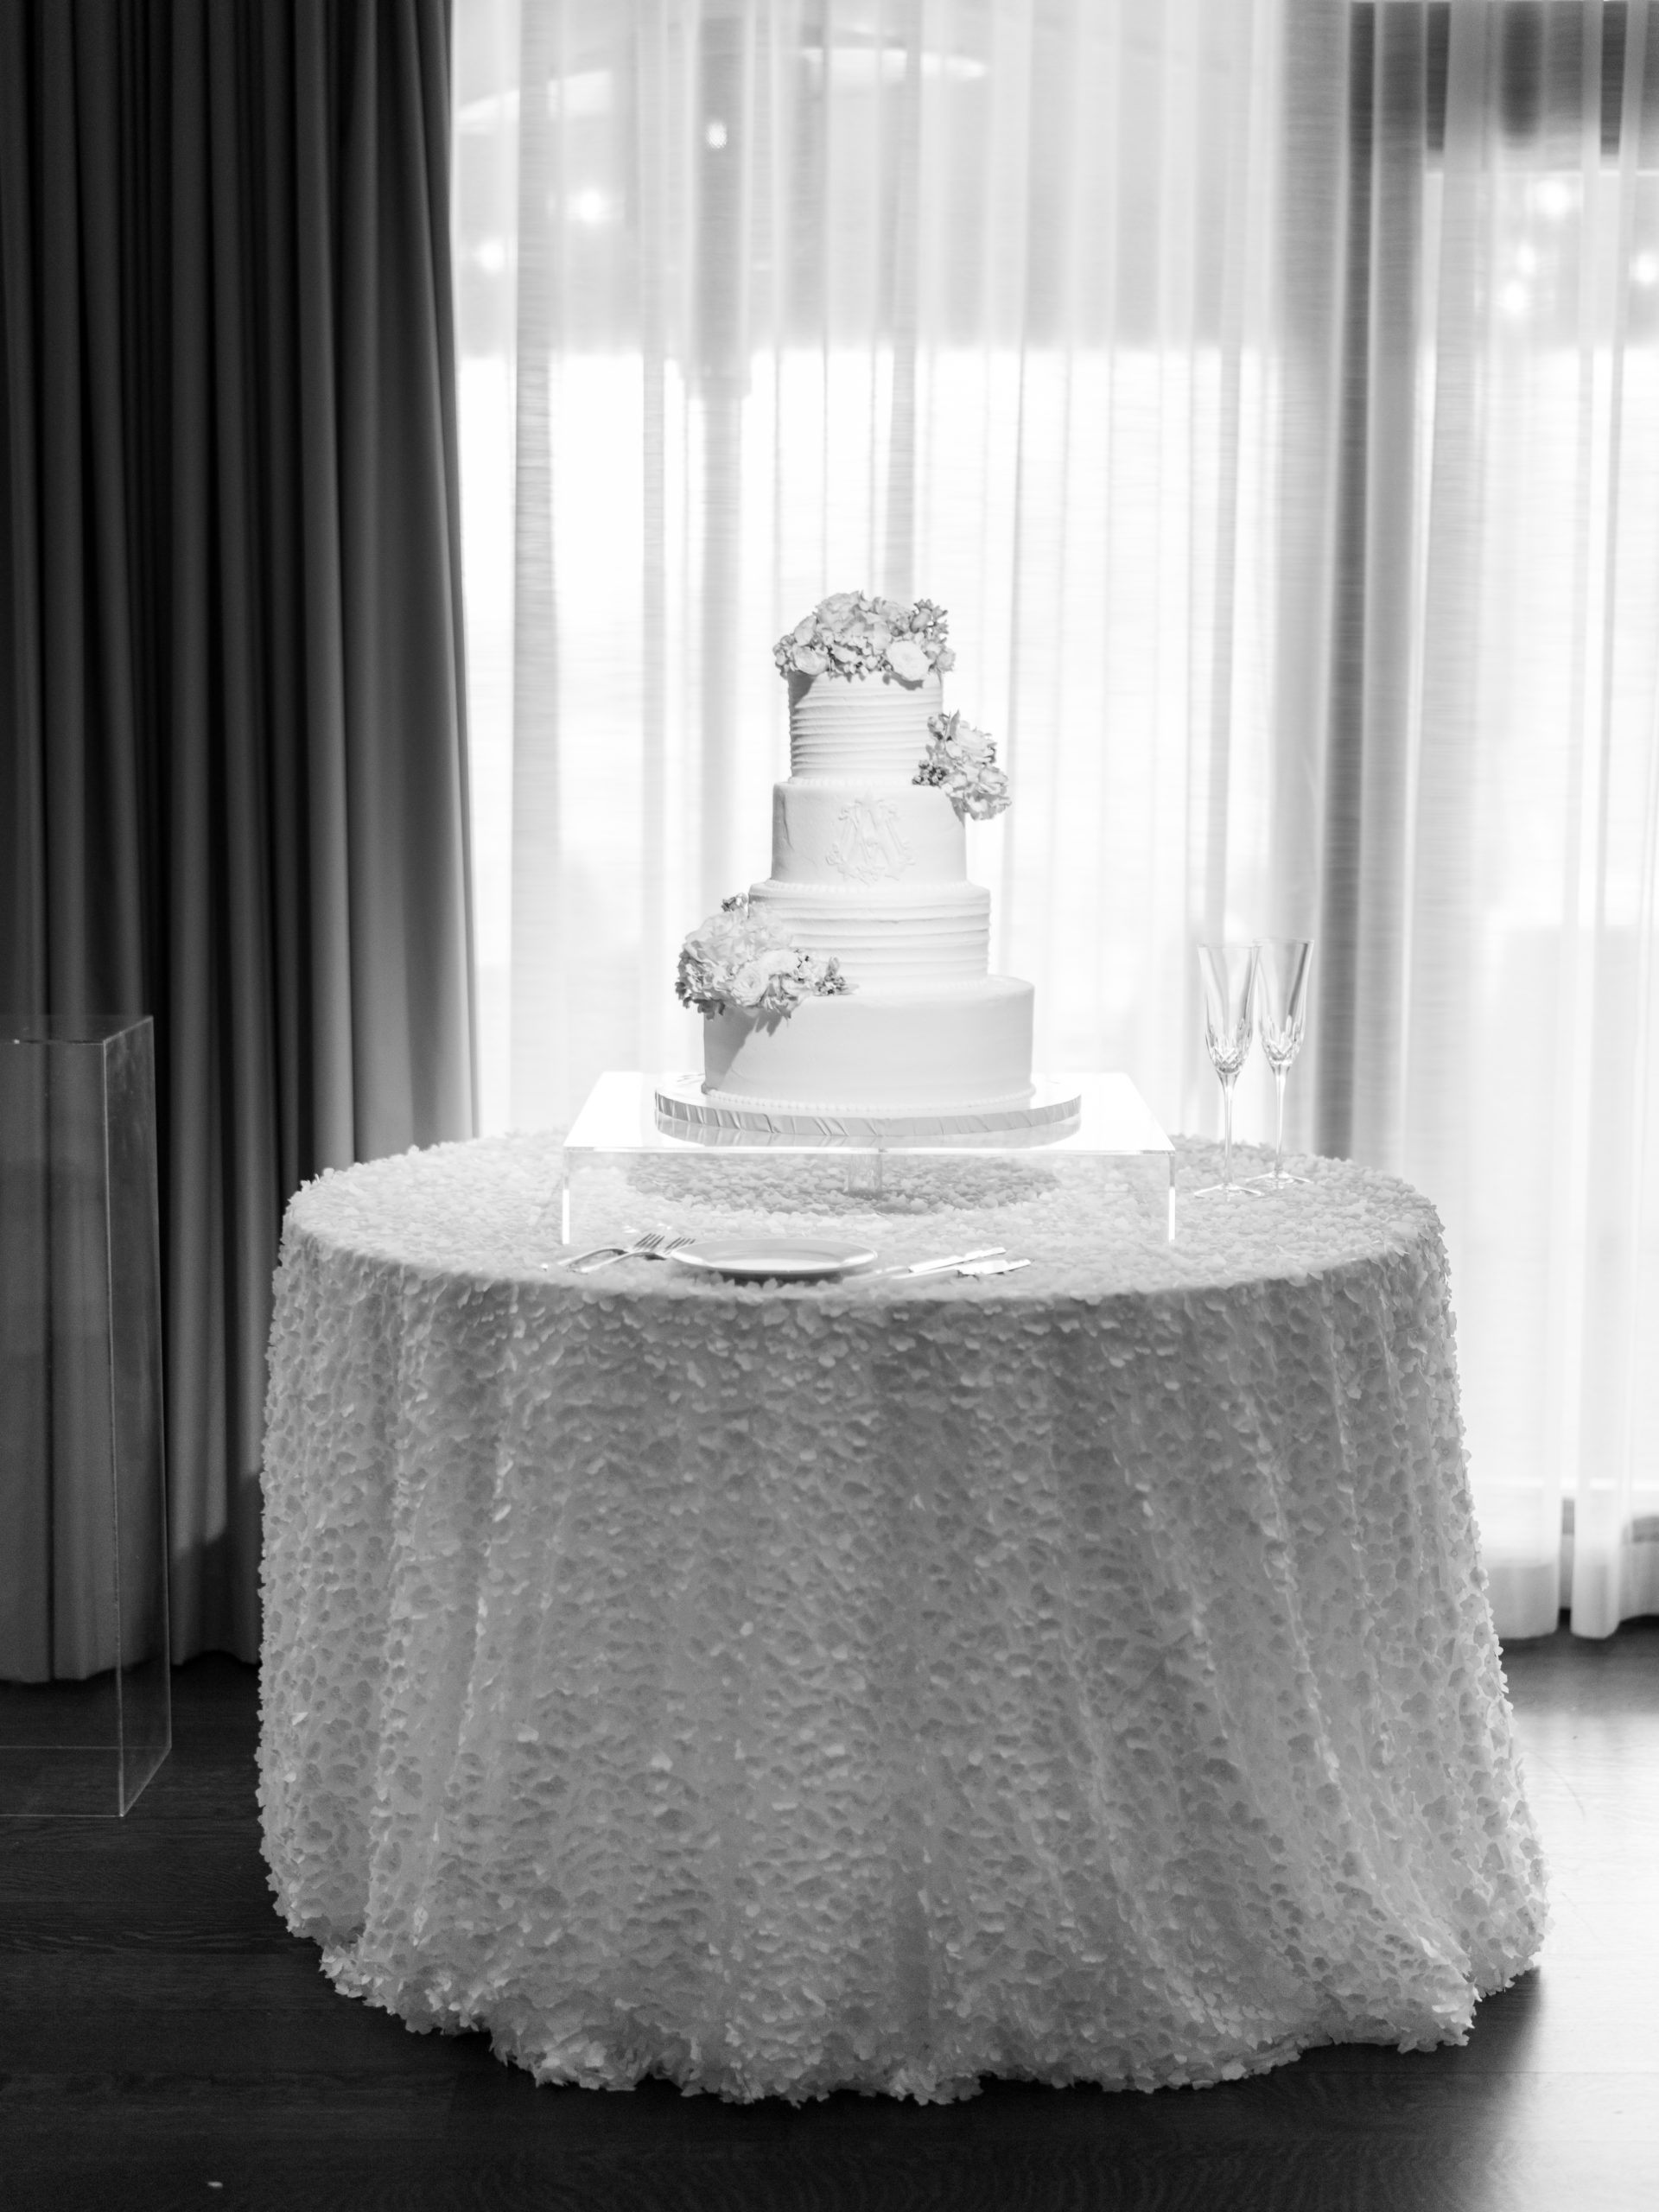 Black and white photo of the three-tier wedding cake placed on top of a round table